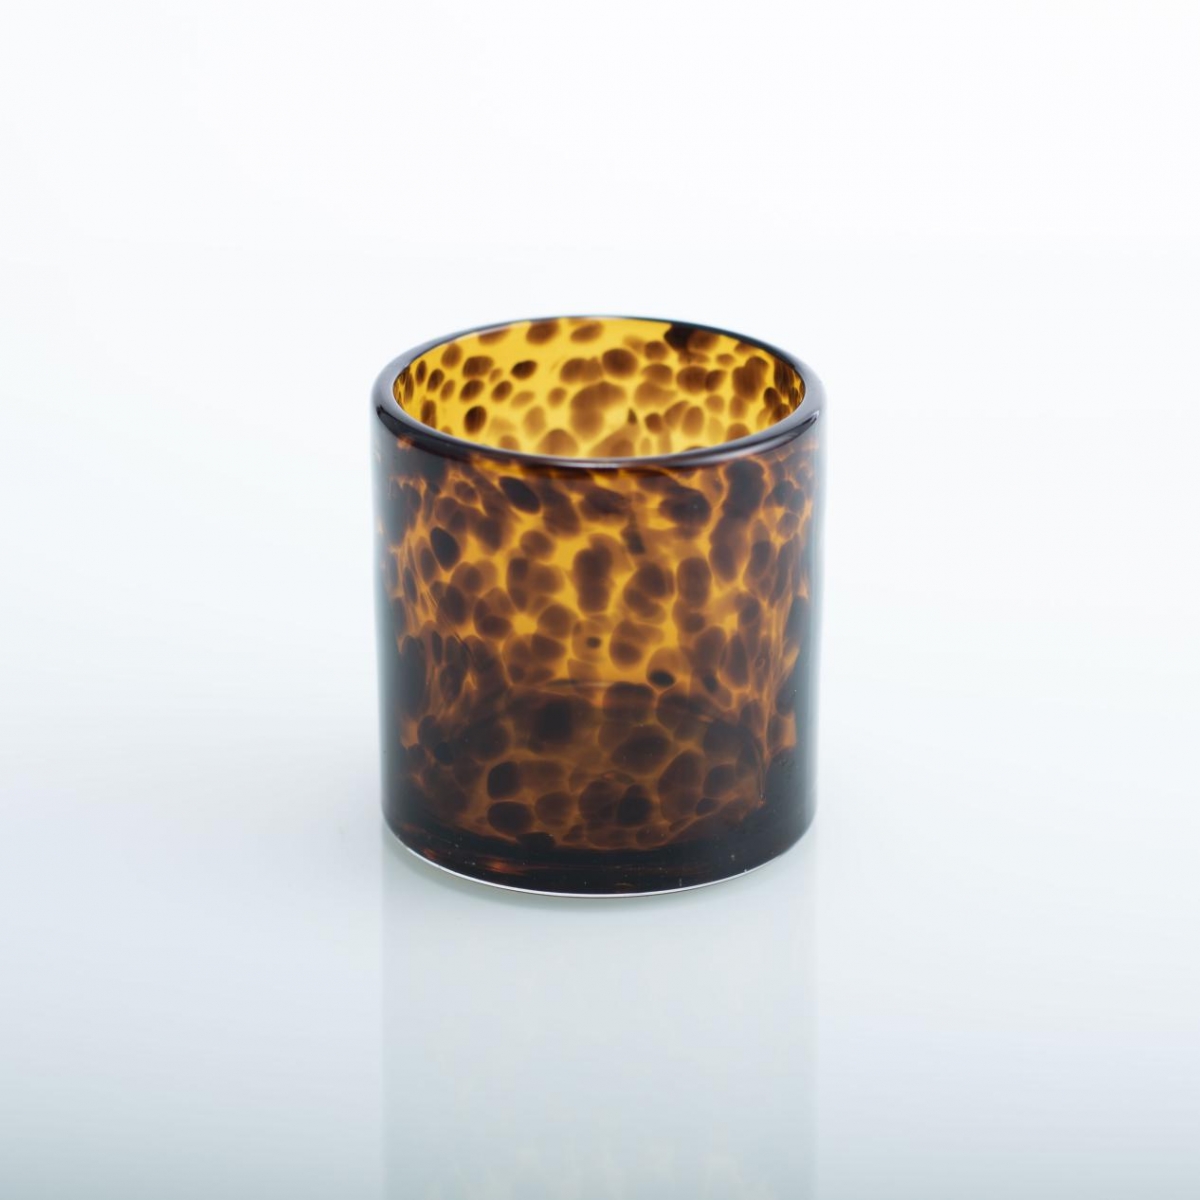 Best Tortoise Shell Candle Jar ：Handmade Glass Candle Holder ,Amber Glass Jar , China Factory , Price-HOWCANDLE-Candles,Scented Candles,Aromatherapy Candles,Soy Candles,Vegan Candles,Jar Candles,Pillar Candles,Candle Gift Sets,Essential Oils,Reed Diffuser,Candle Holder,